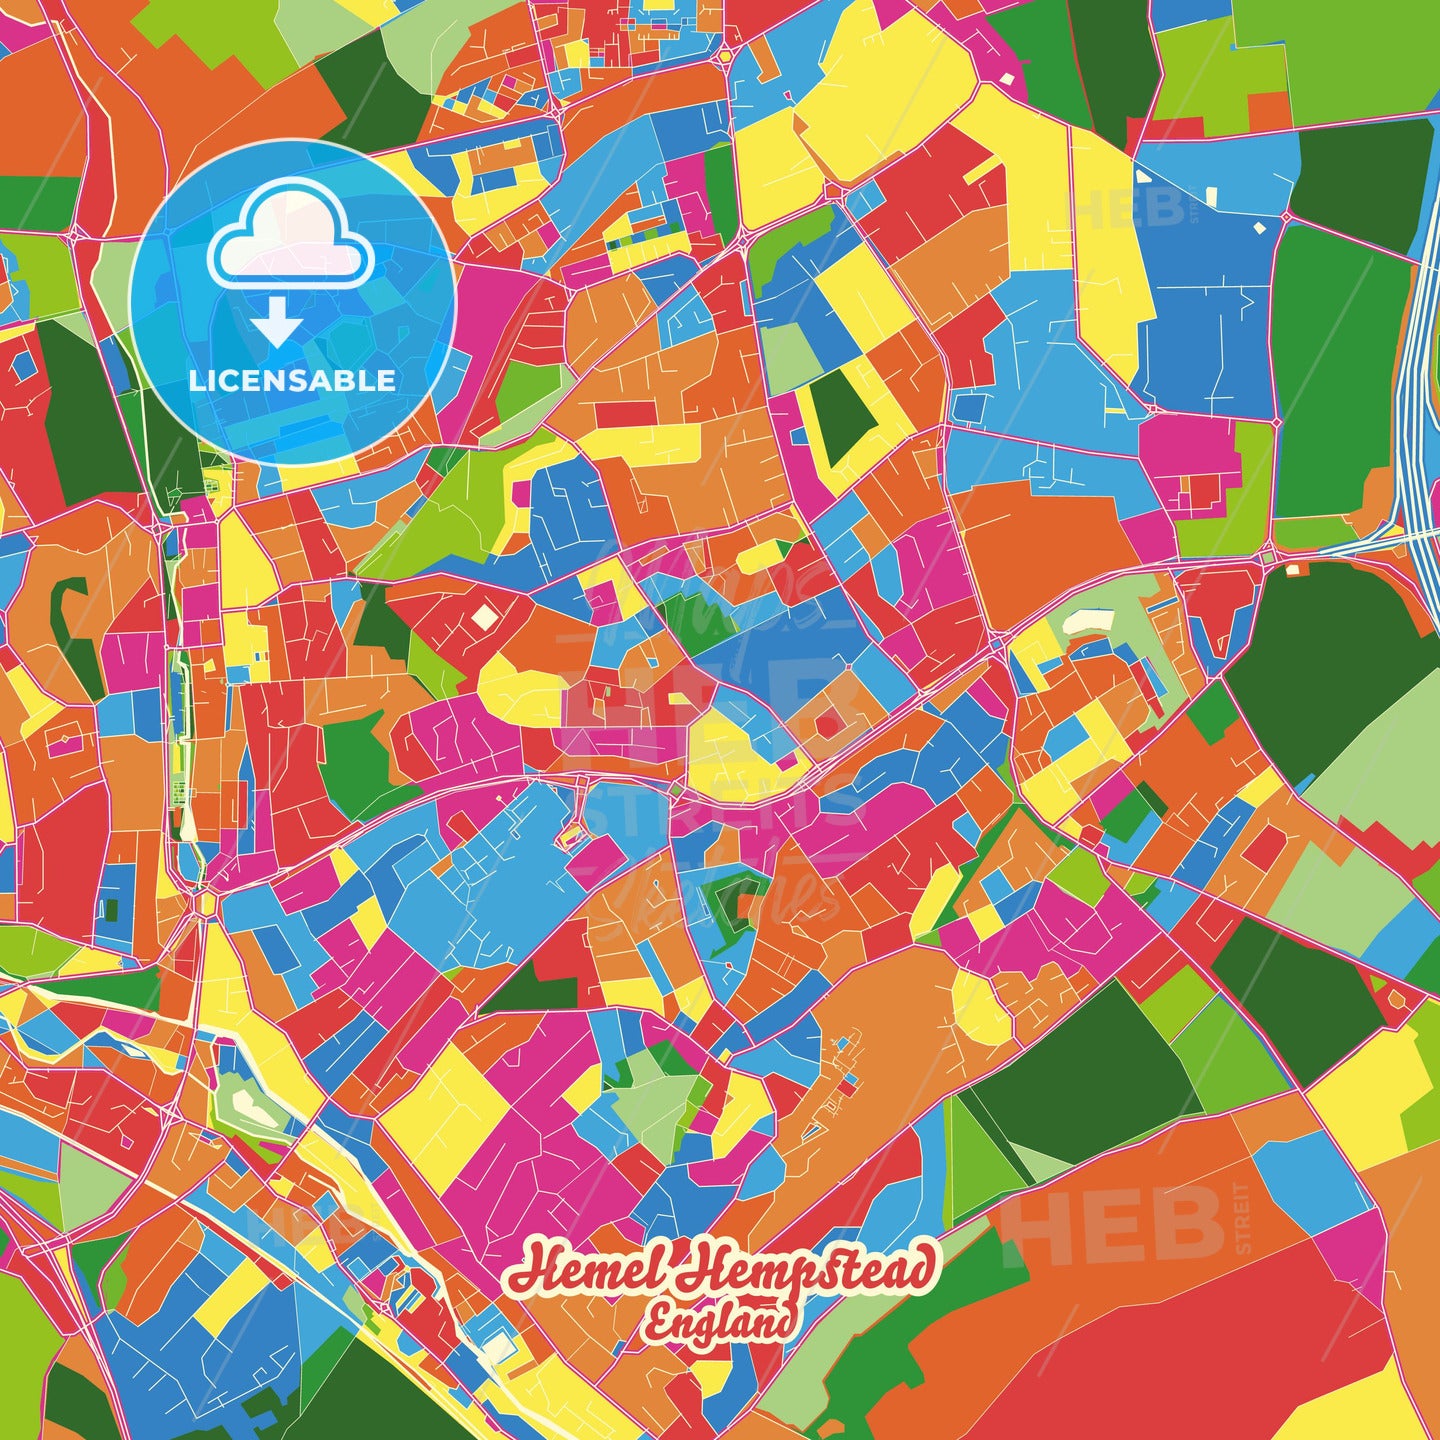 Hemel Hempstead, England Crazy Colorful Street Map Poster Template - HEBSTREITS Sketches